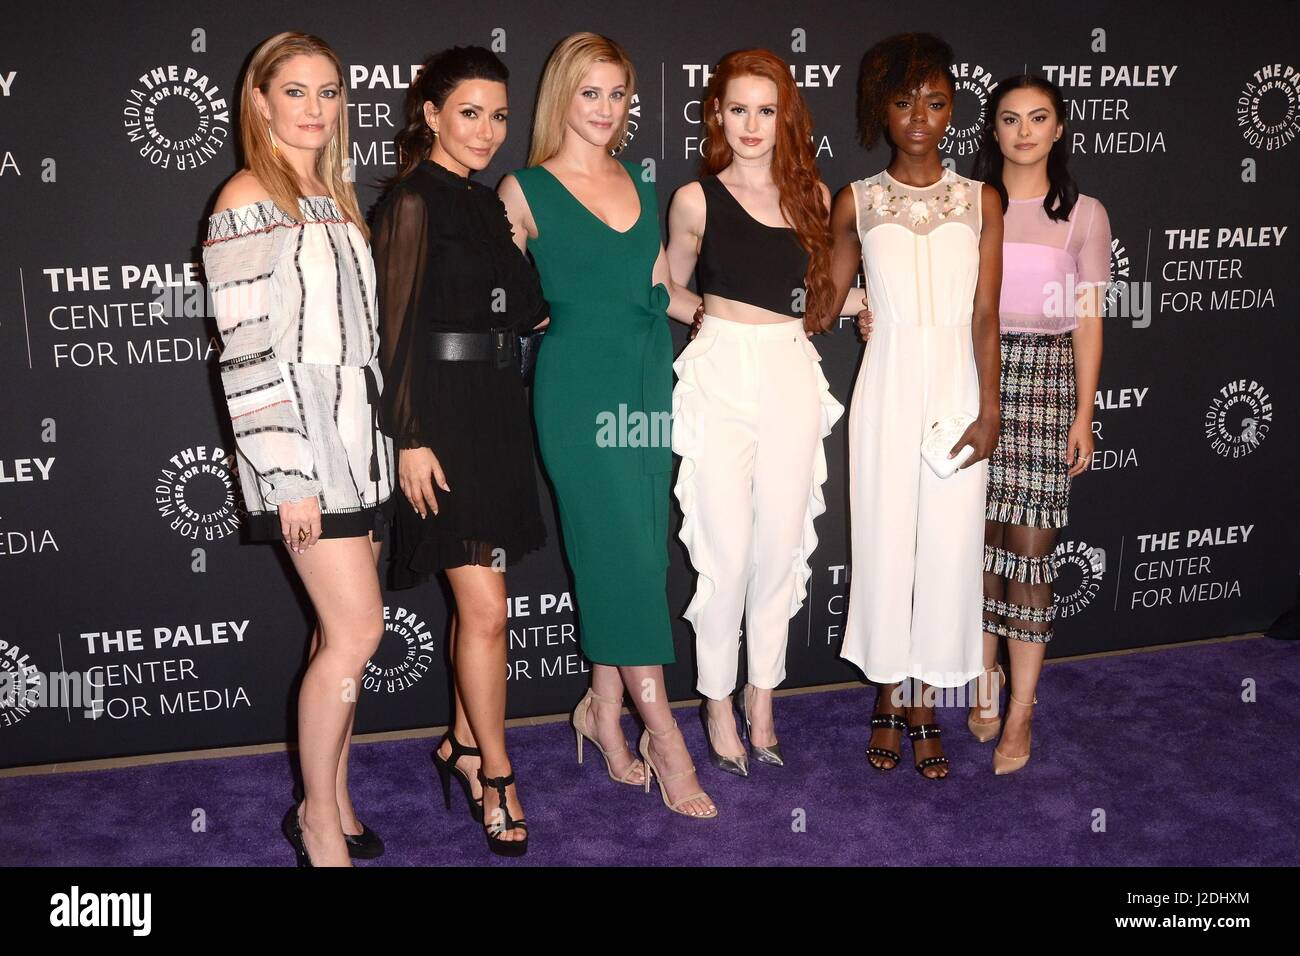 Beverly Hills, CA. 27th Apr, 2017. Madchen Amick, Marisol Nichols, Lili Reinhart, Madelaine Petsch, Ashleigh Murray, Camila Mendes at arrivals for The CW's RIVERDALE Screening and Conversation, The Paley Center for Media, Beverly Hills, CA April 27, 2017. Credit: Priscilla Grant/Everett Collection/Alamy Live News Stock Photo